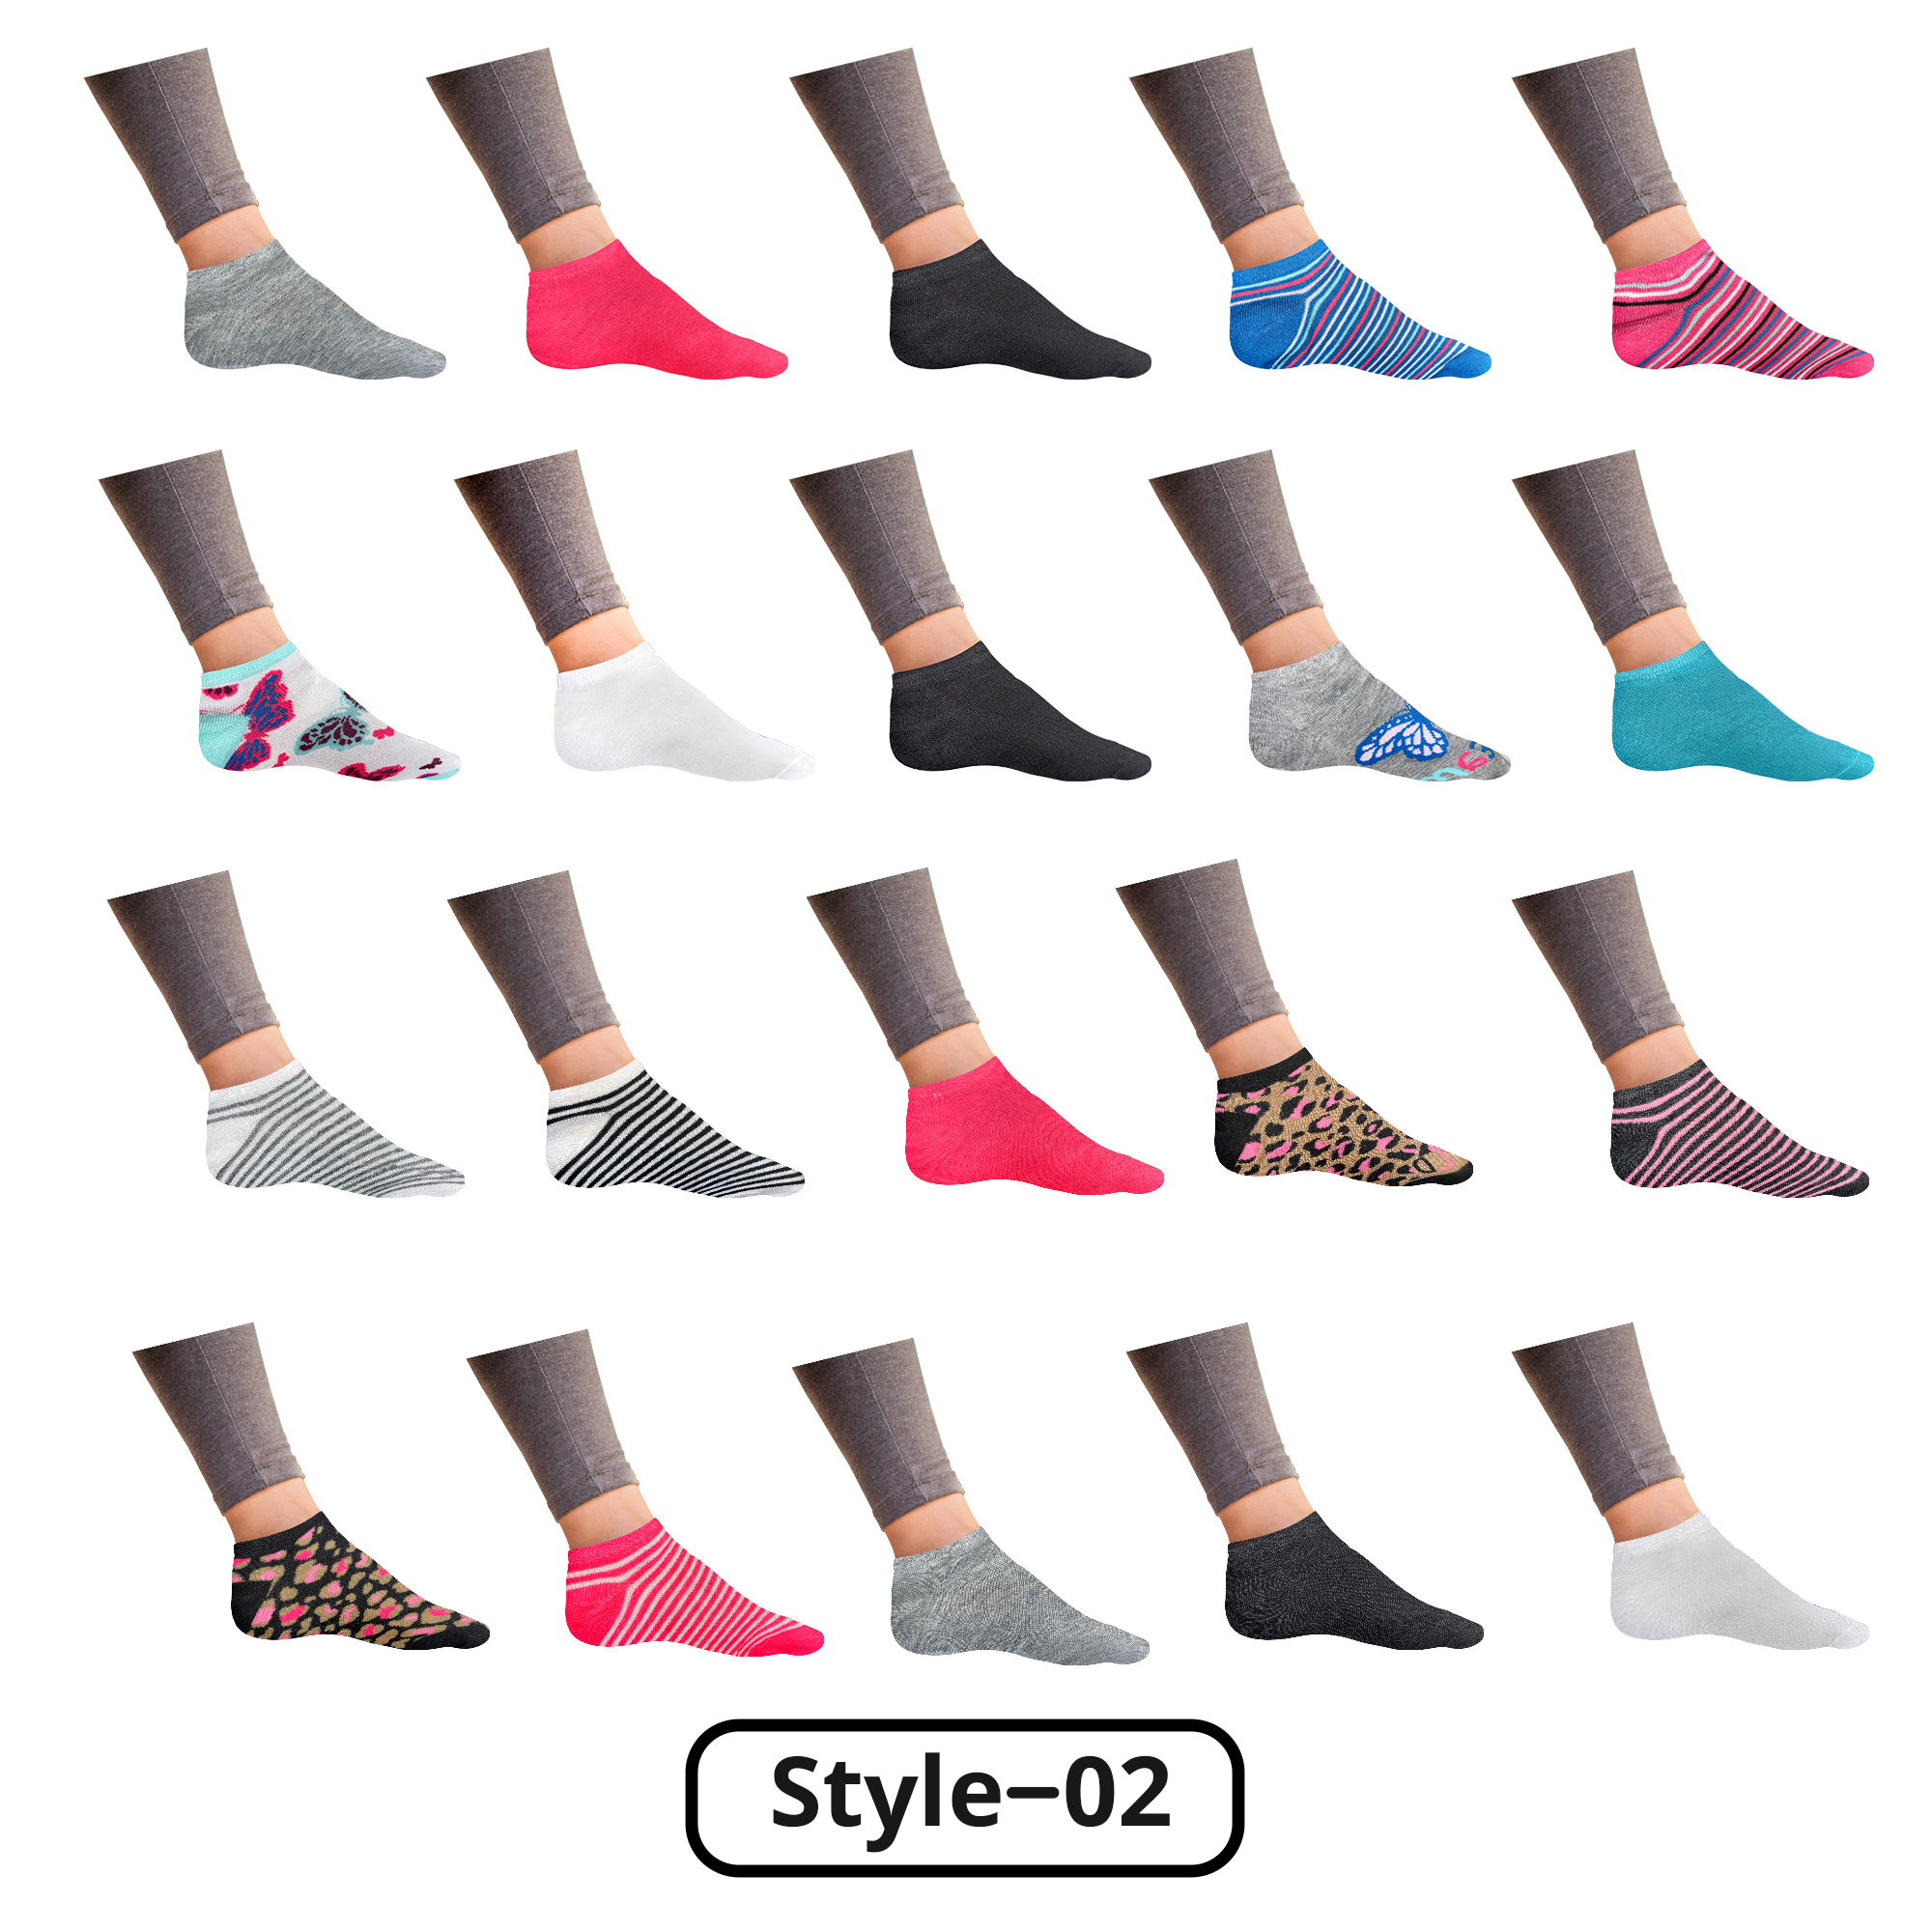 20-Pairs: Women’s Breathable Stylish Colorful Fun No Show Low Cut Ankle Socks - Style 12